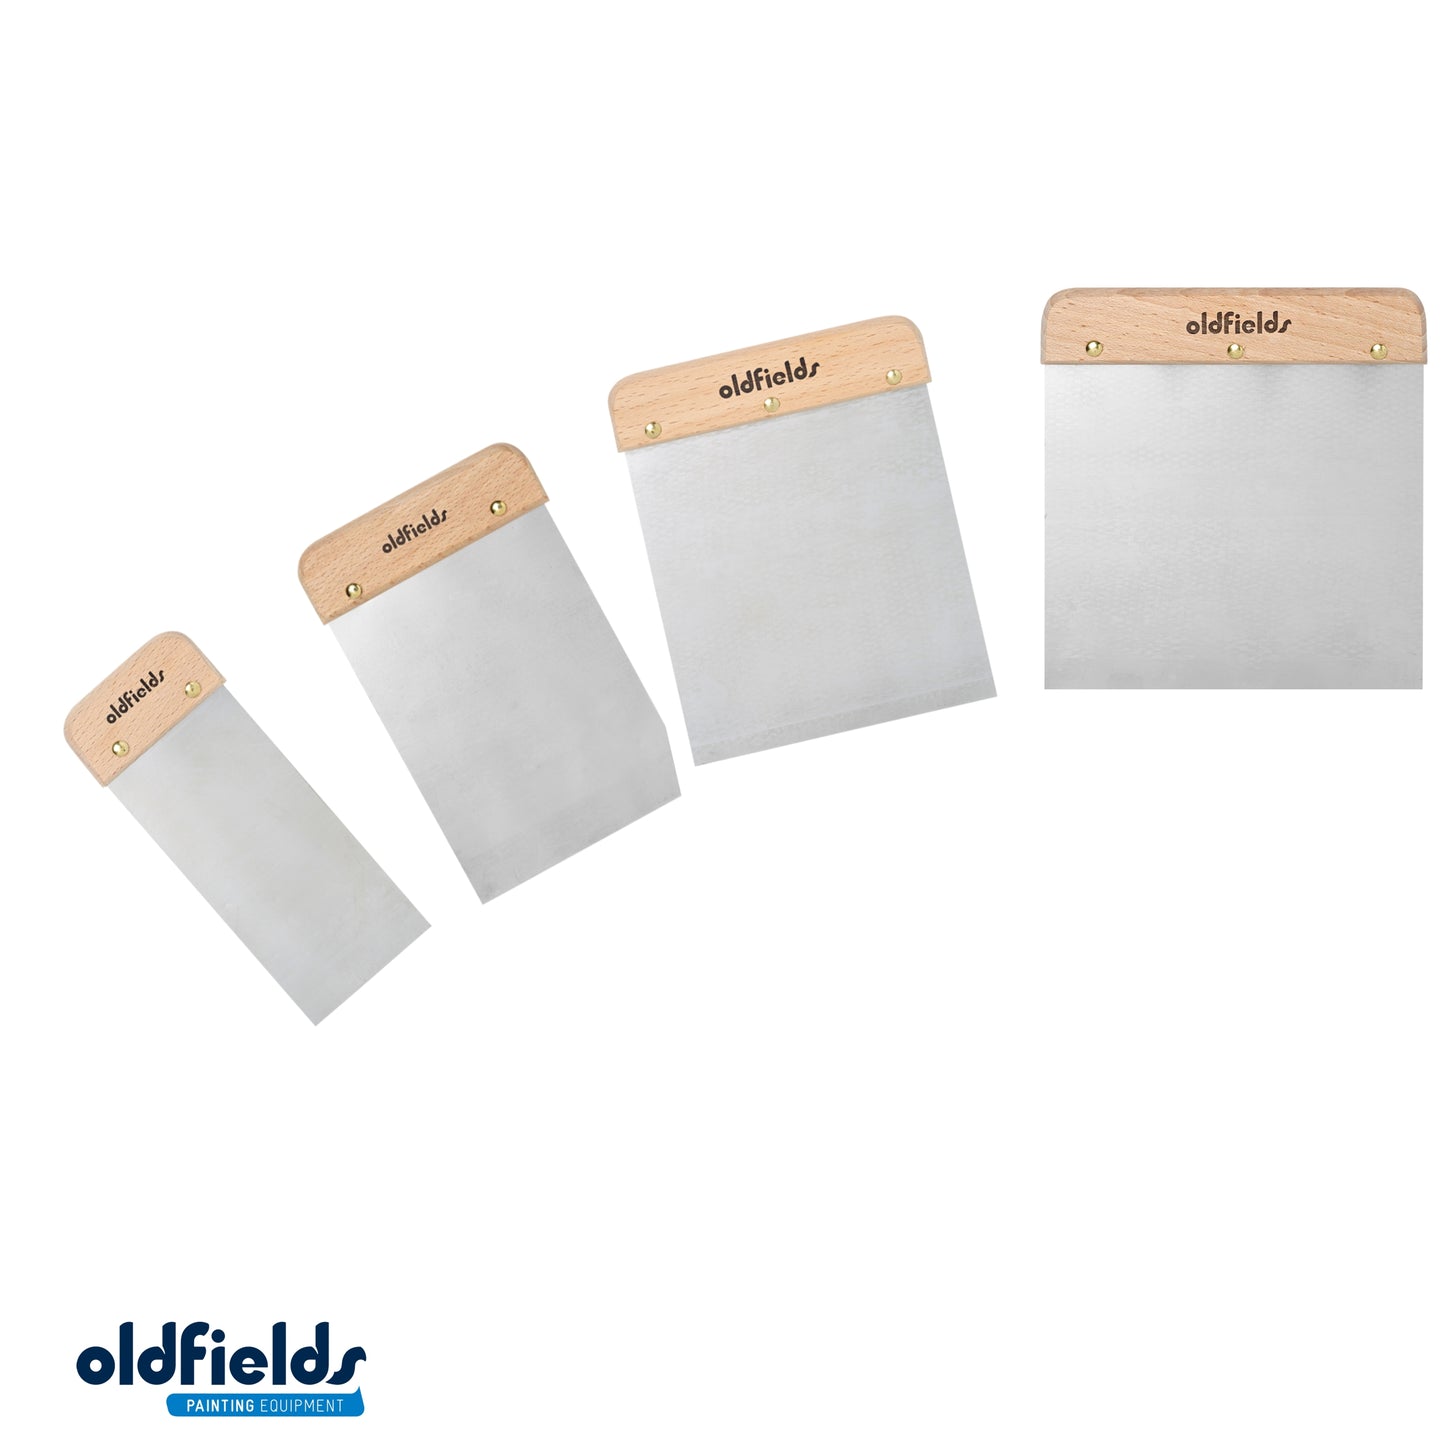 Pro Series Flexible Filling Blades from Oldfields